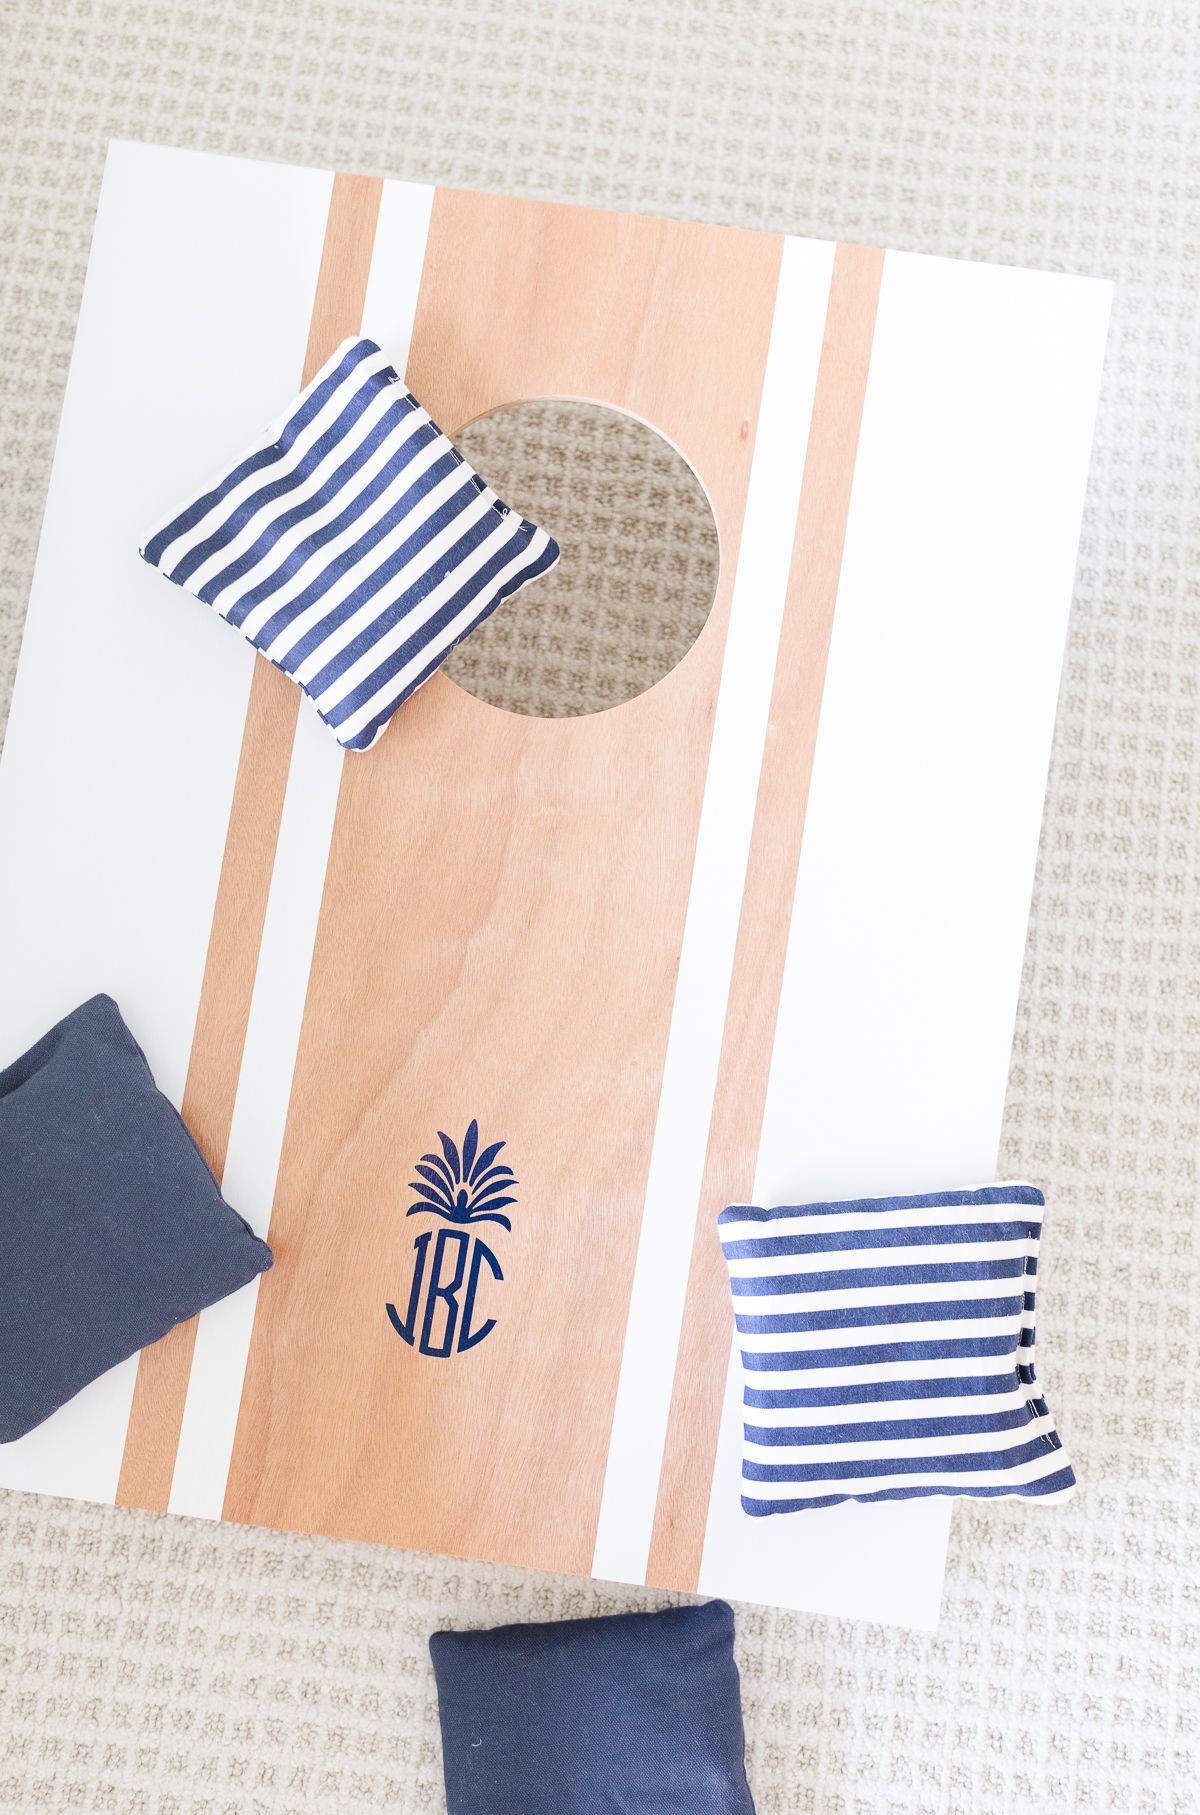 A cornhole board with a wooden surface and a white strip design with the letters "JBC" in blue at the bottom, surrounded by three striped and one plain navy blue bean bags.